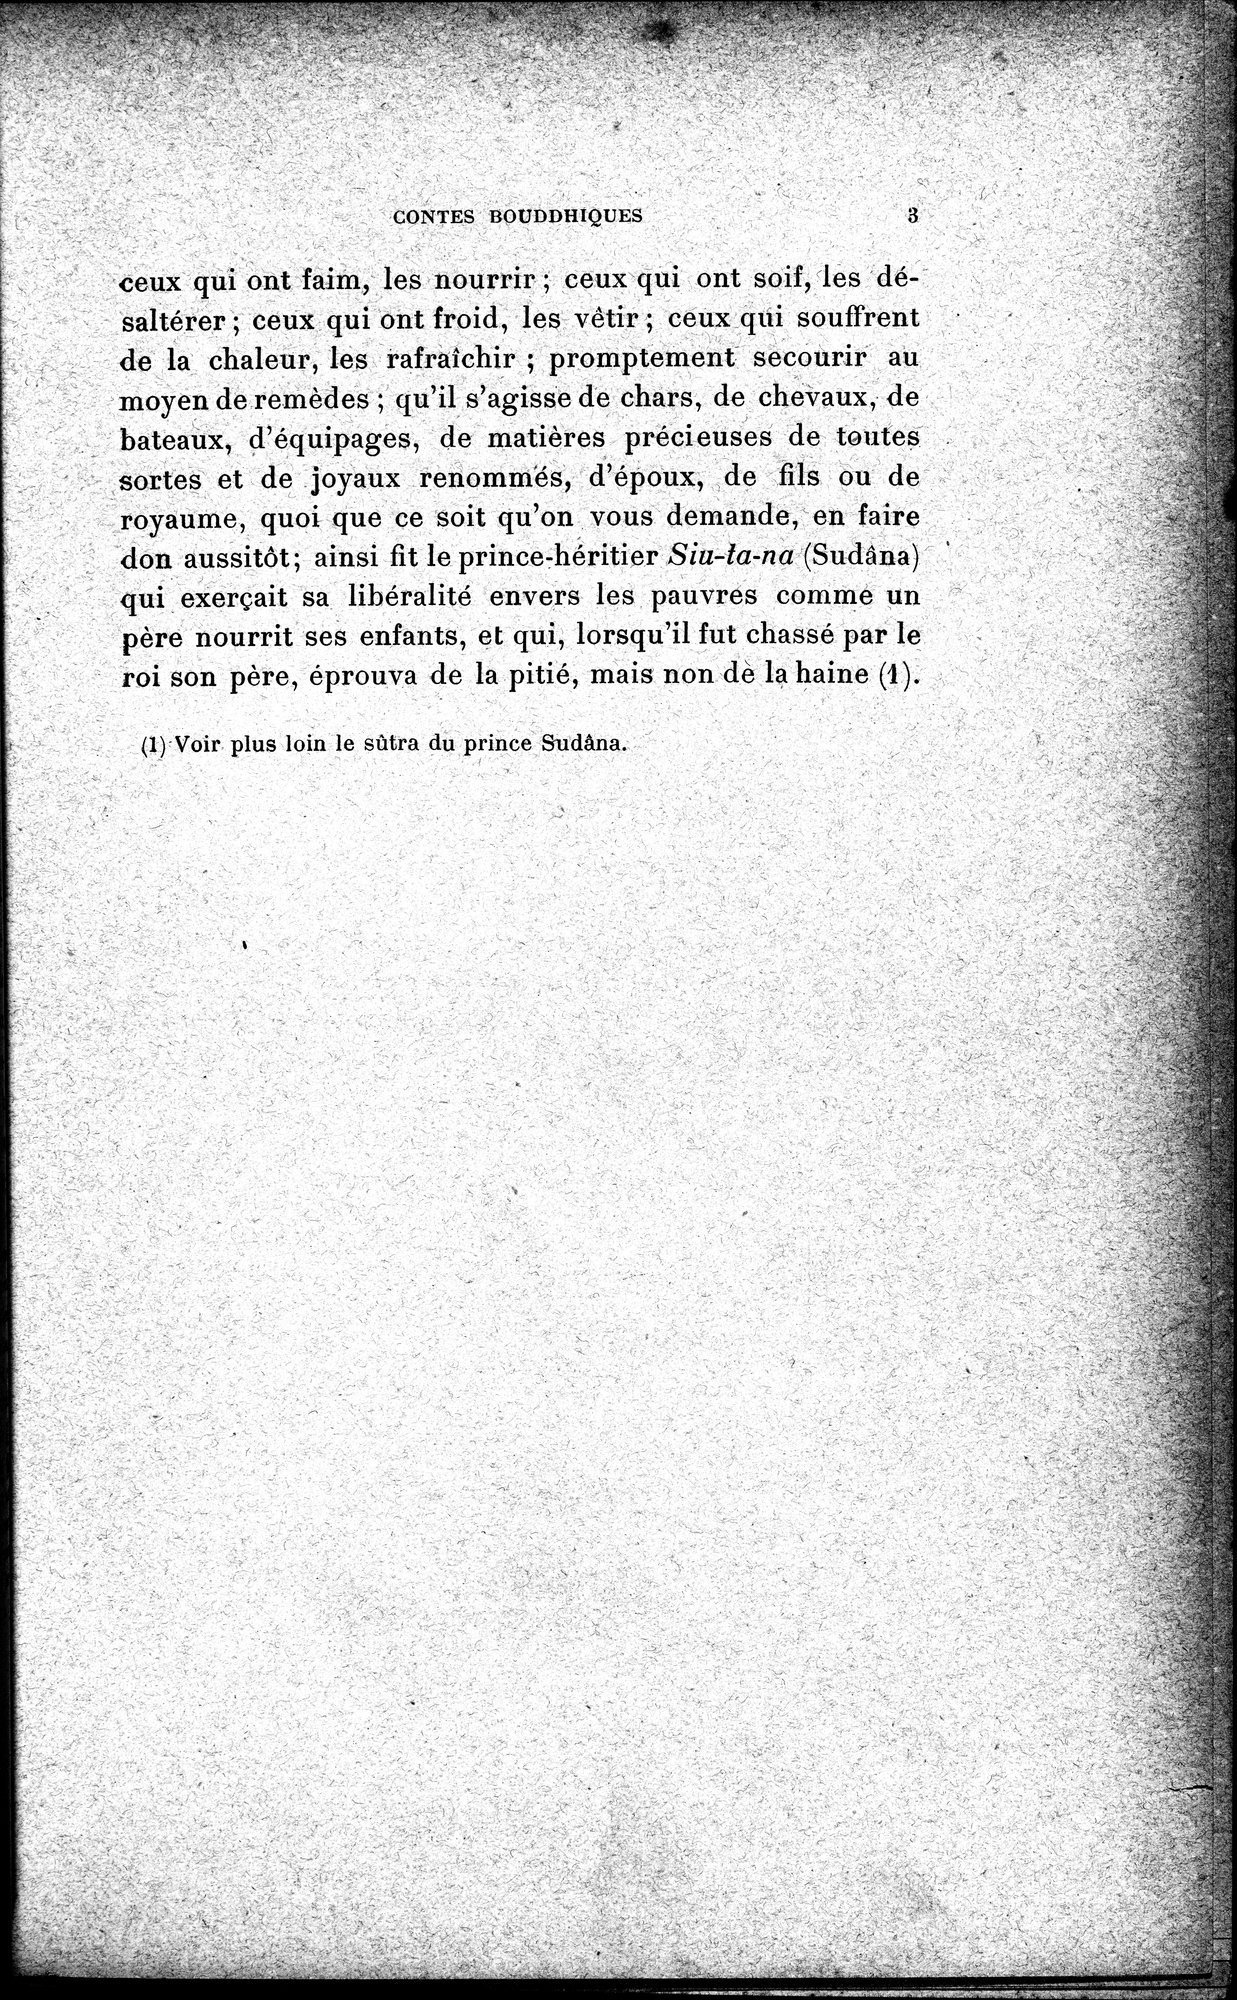 Cinq Cents Contes et Apologues : vol.1 / Page 37 (Grayscale High Resolution Image)